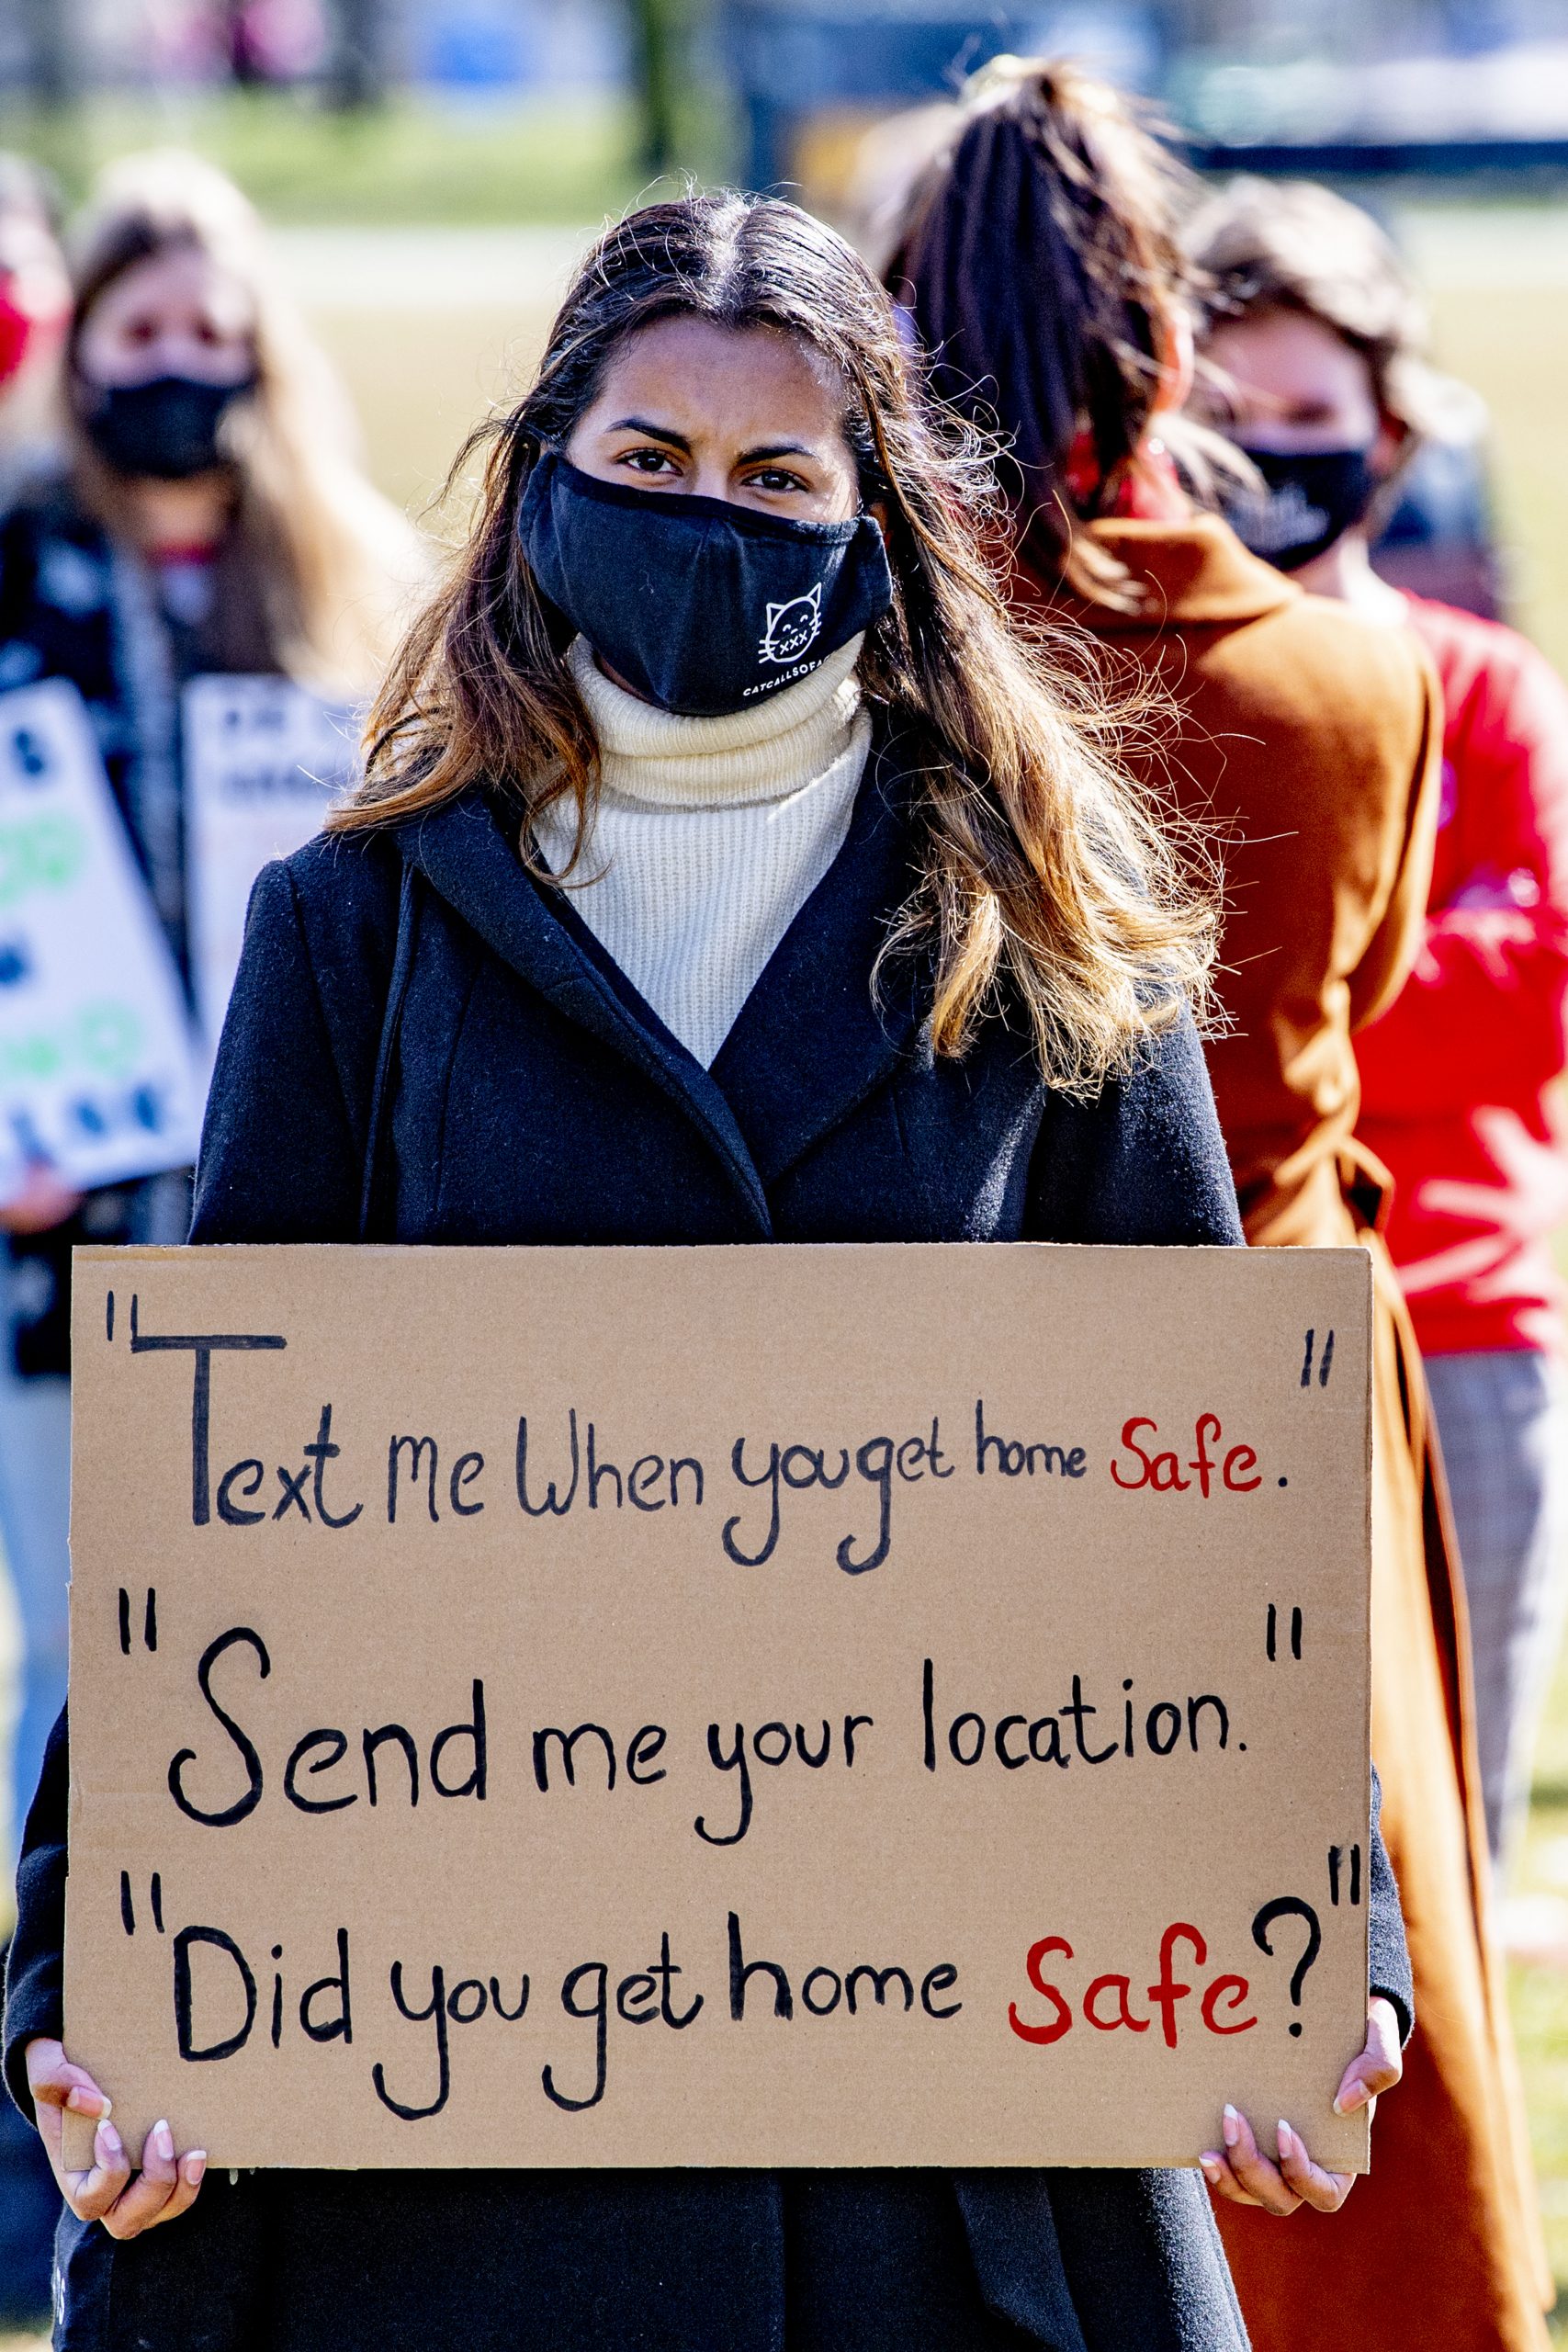 Protest sign reading texts about getting home safe